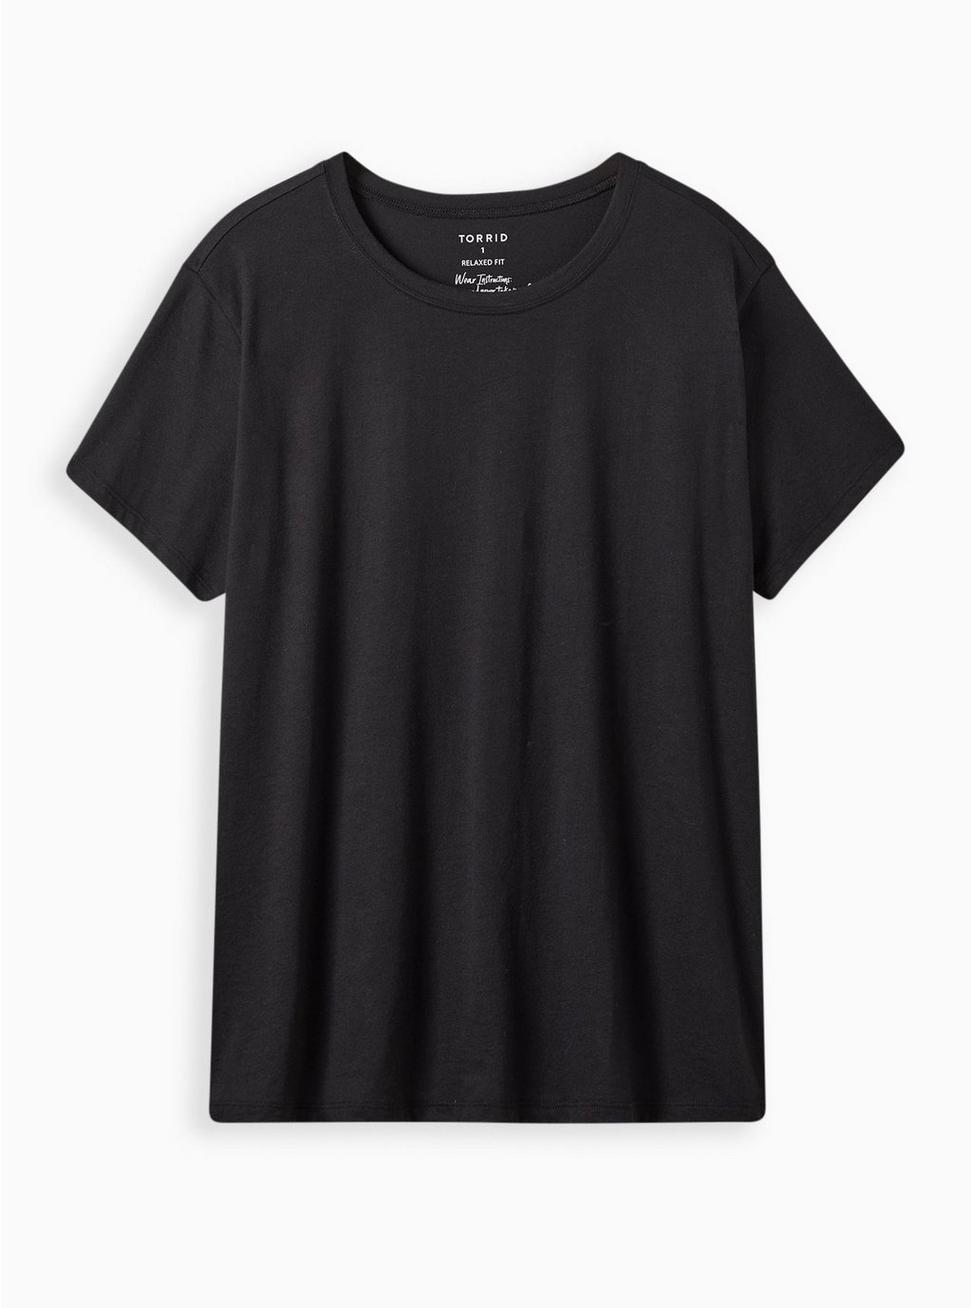 Relaxed Fit Signature Jersey Tee, DEEP BLACK, hi-res